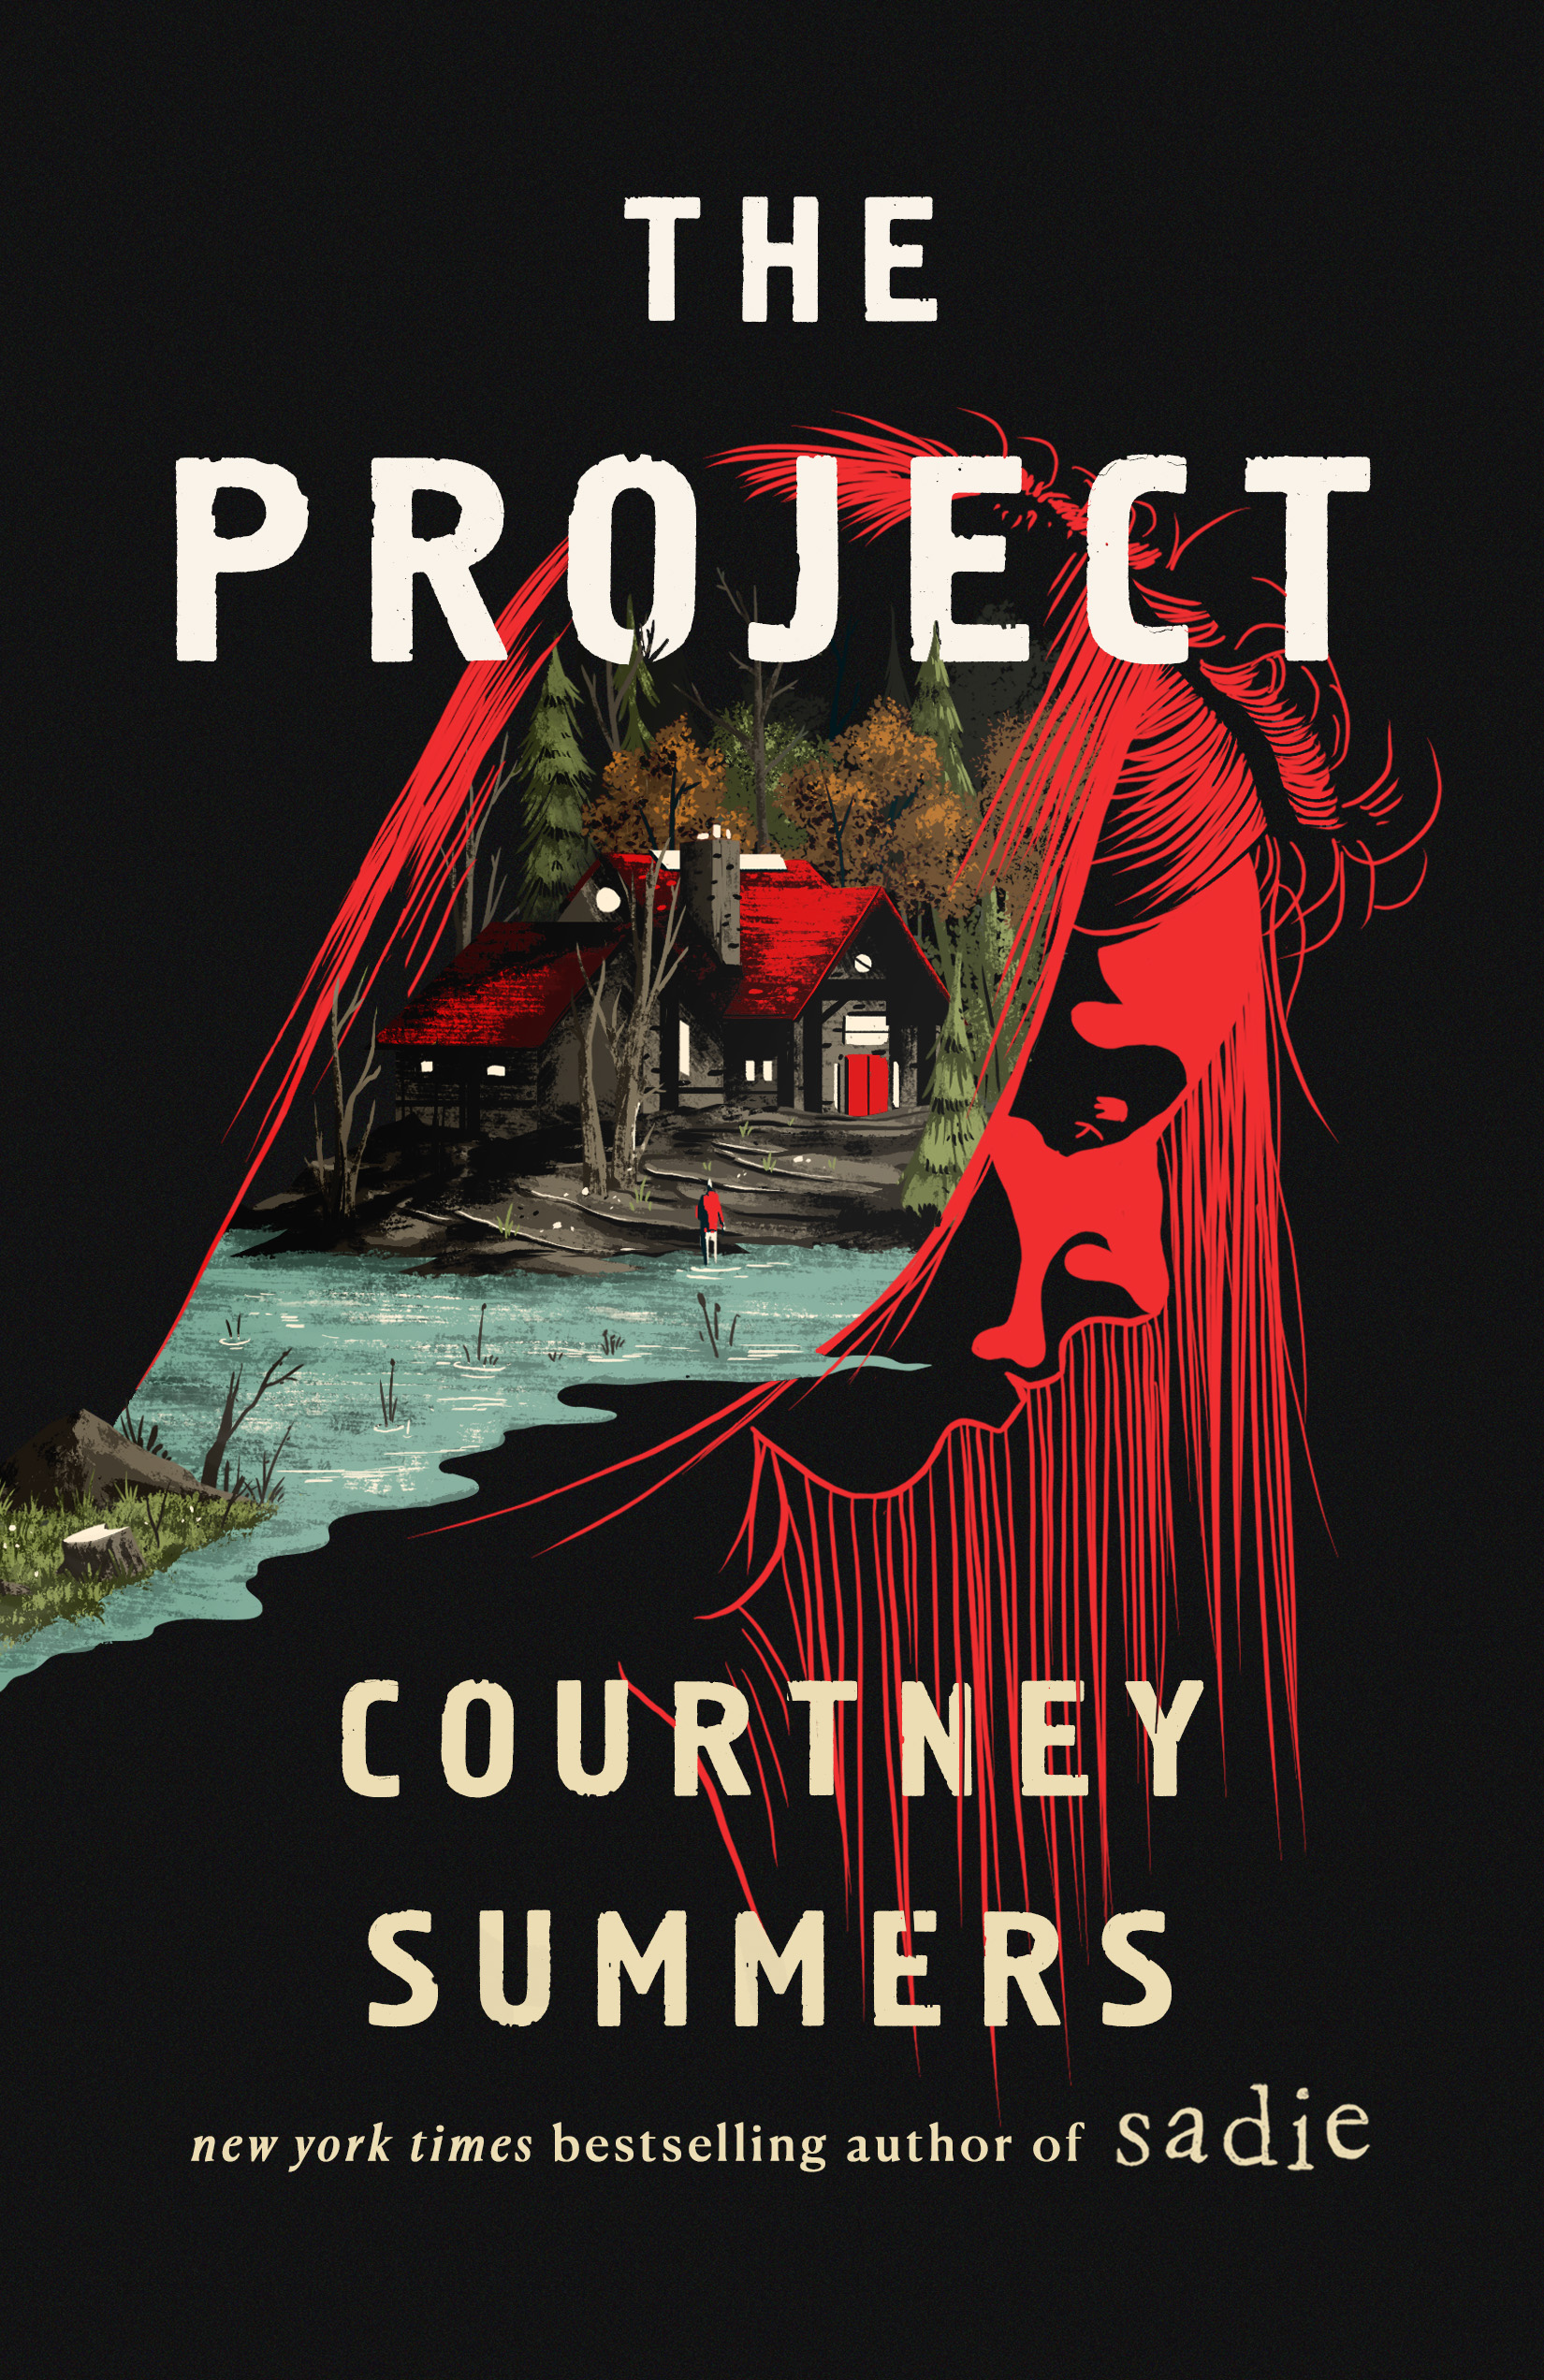 The cover of The Project features a dejected-looking young woman looking down, her hair falling behind her silhouetted face. The sweep of hair in the foreground contains an image of a cabin in the woods. 